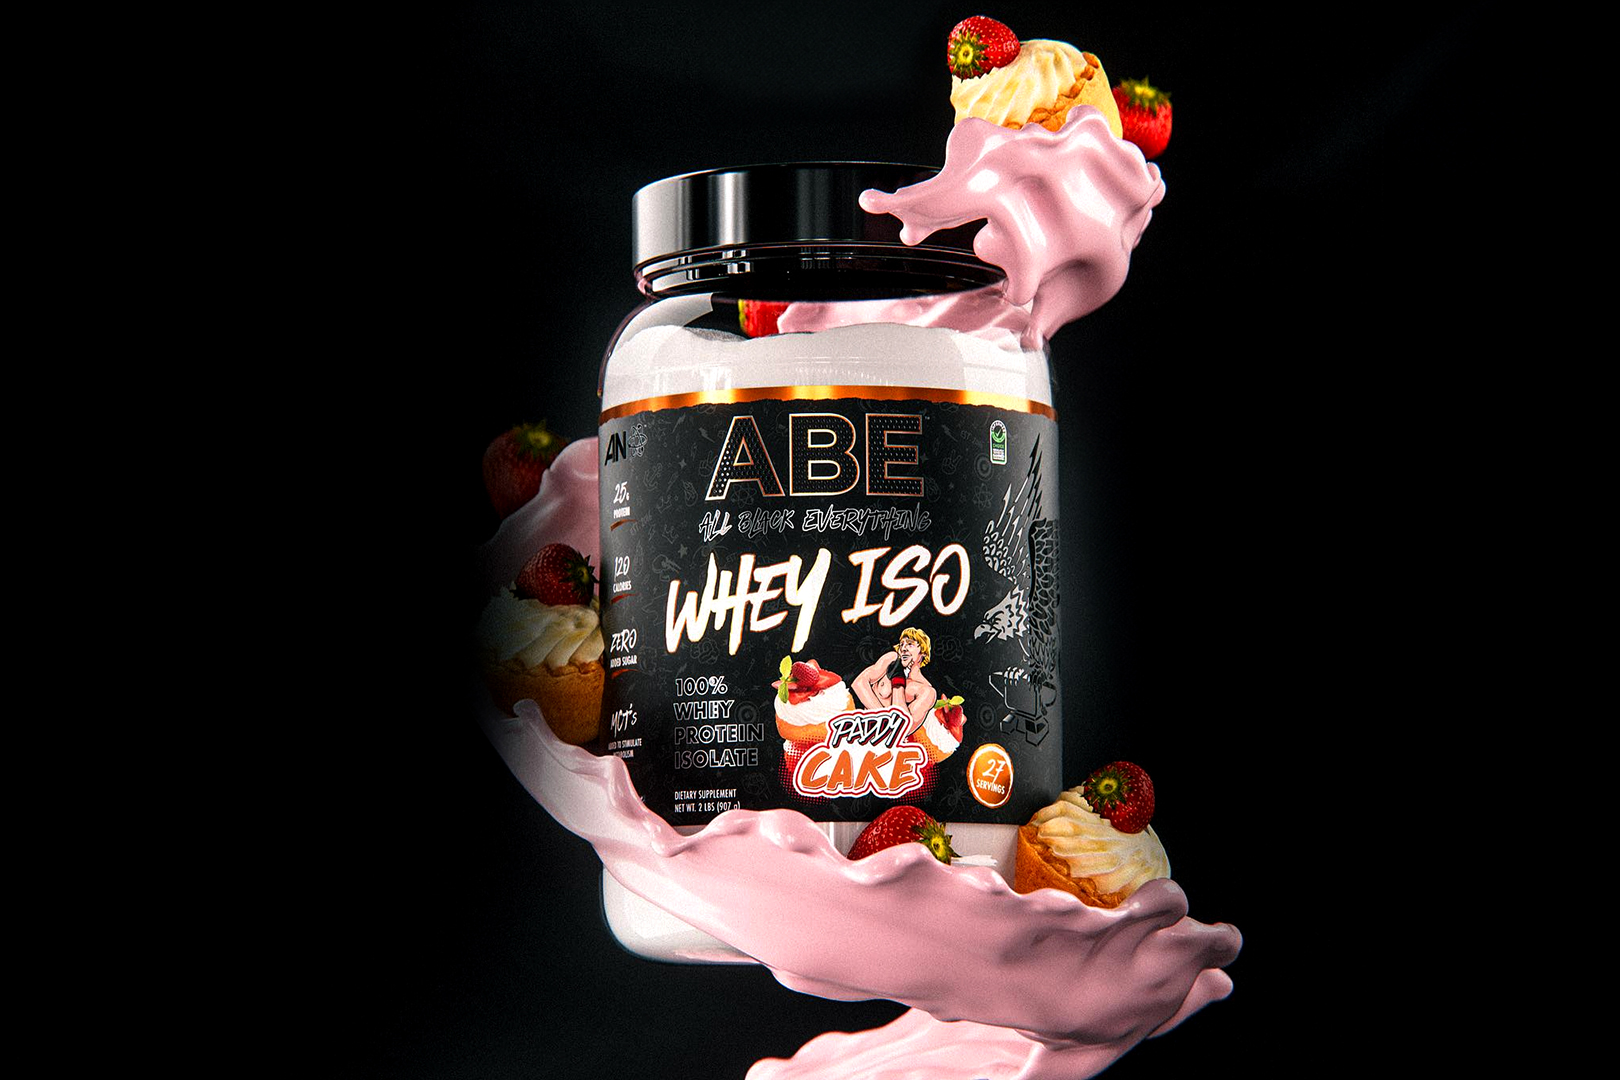 Applied Nutrition Paddy Cake Abe Whey Iso